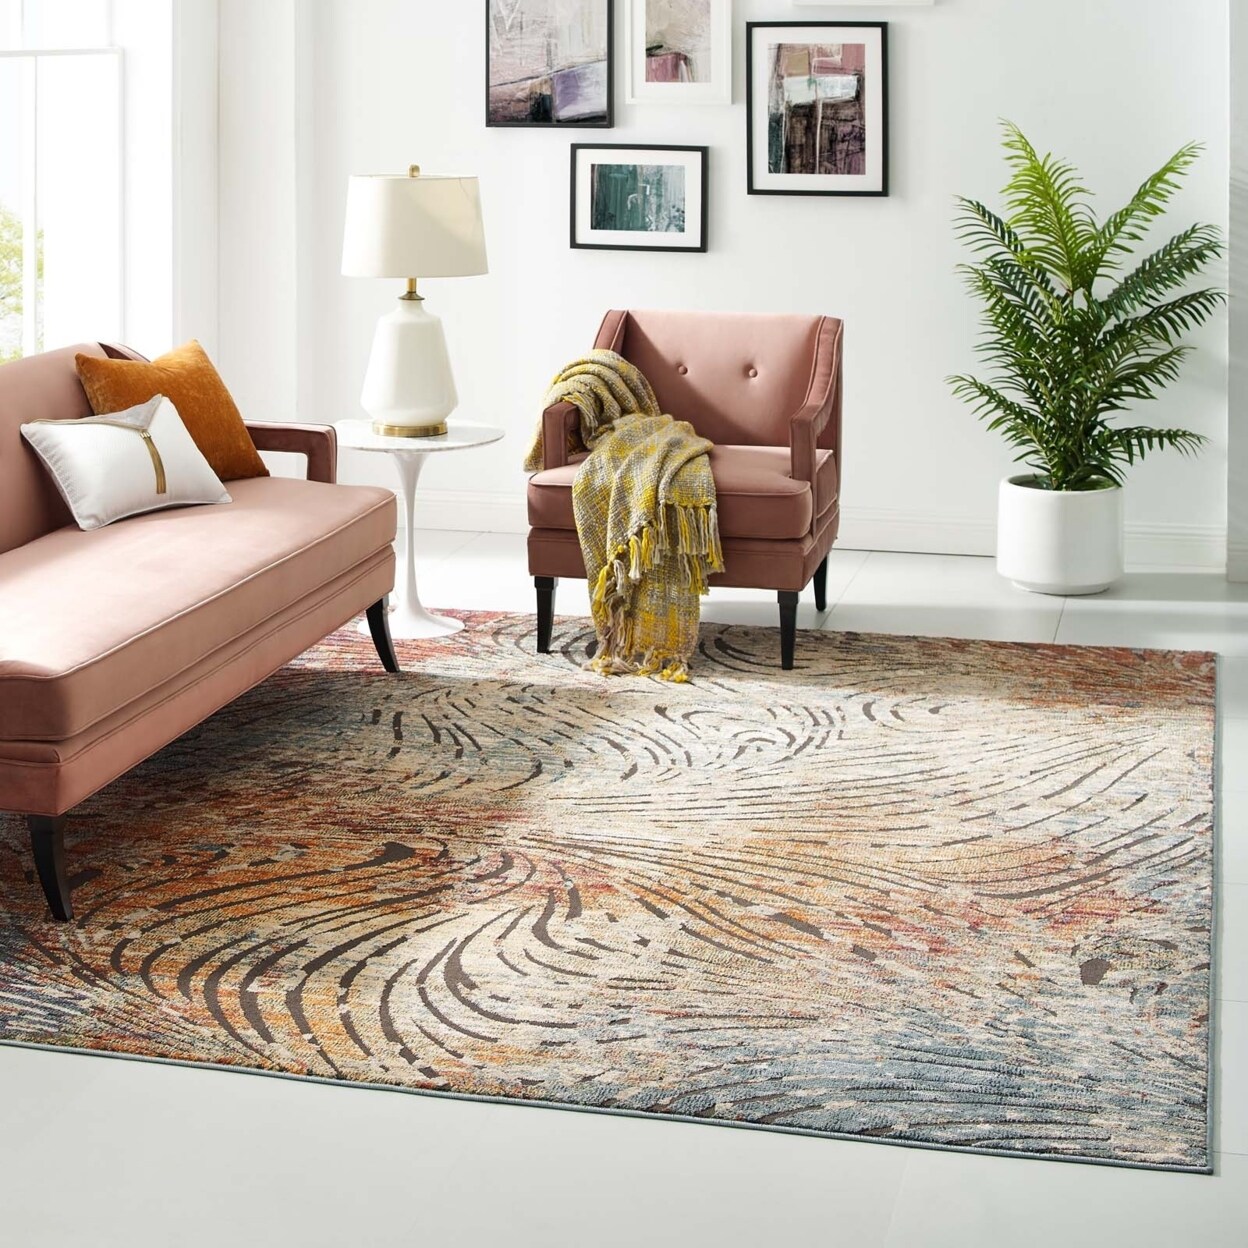 Make a Statement with Modern Entryway Rugs